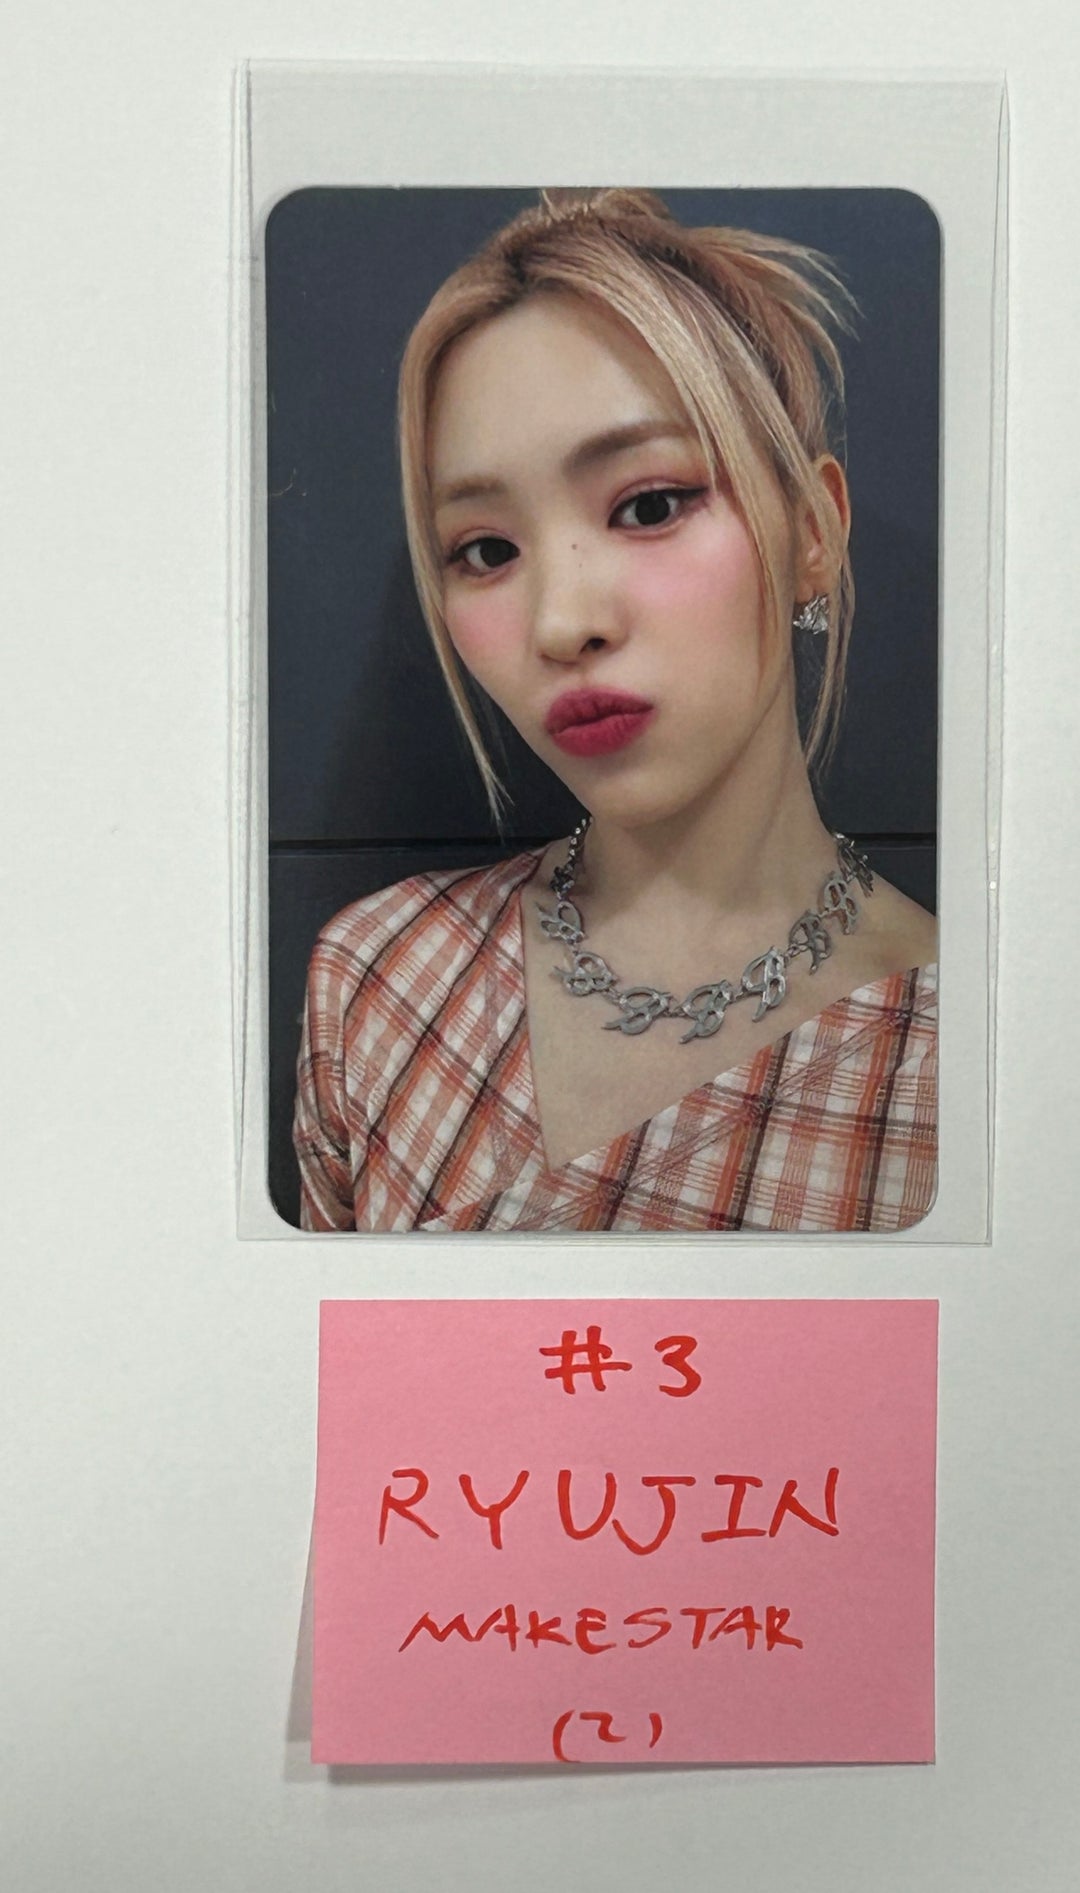 ITZY "BORN TO BE" - Makestar Event Photocard [24.3.7]